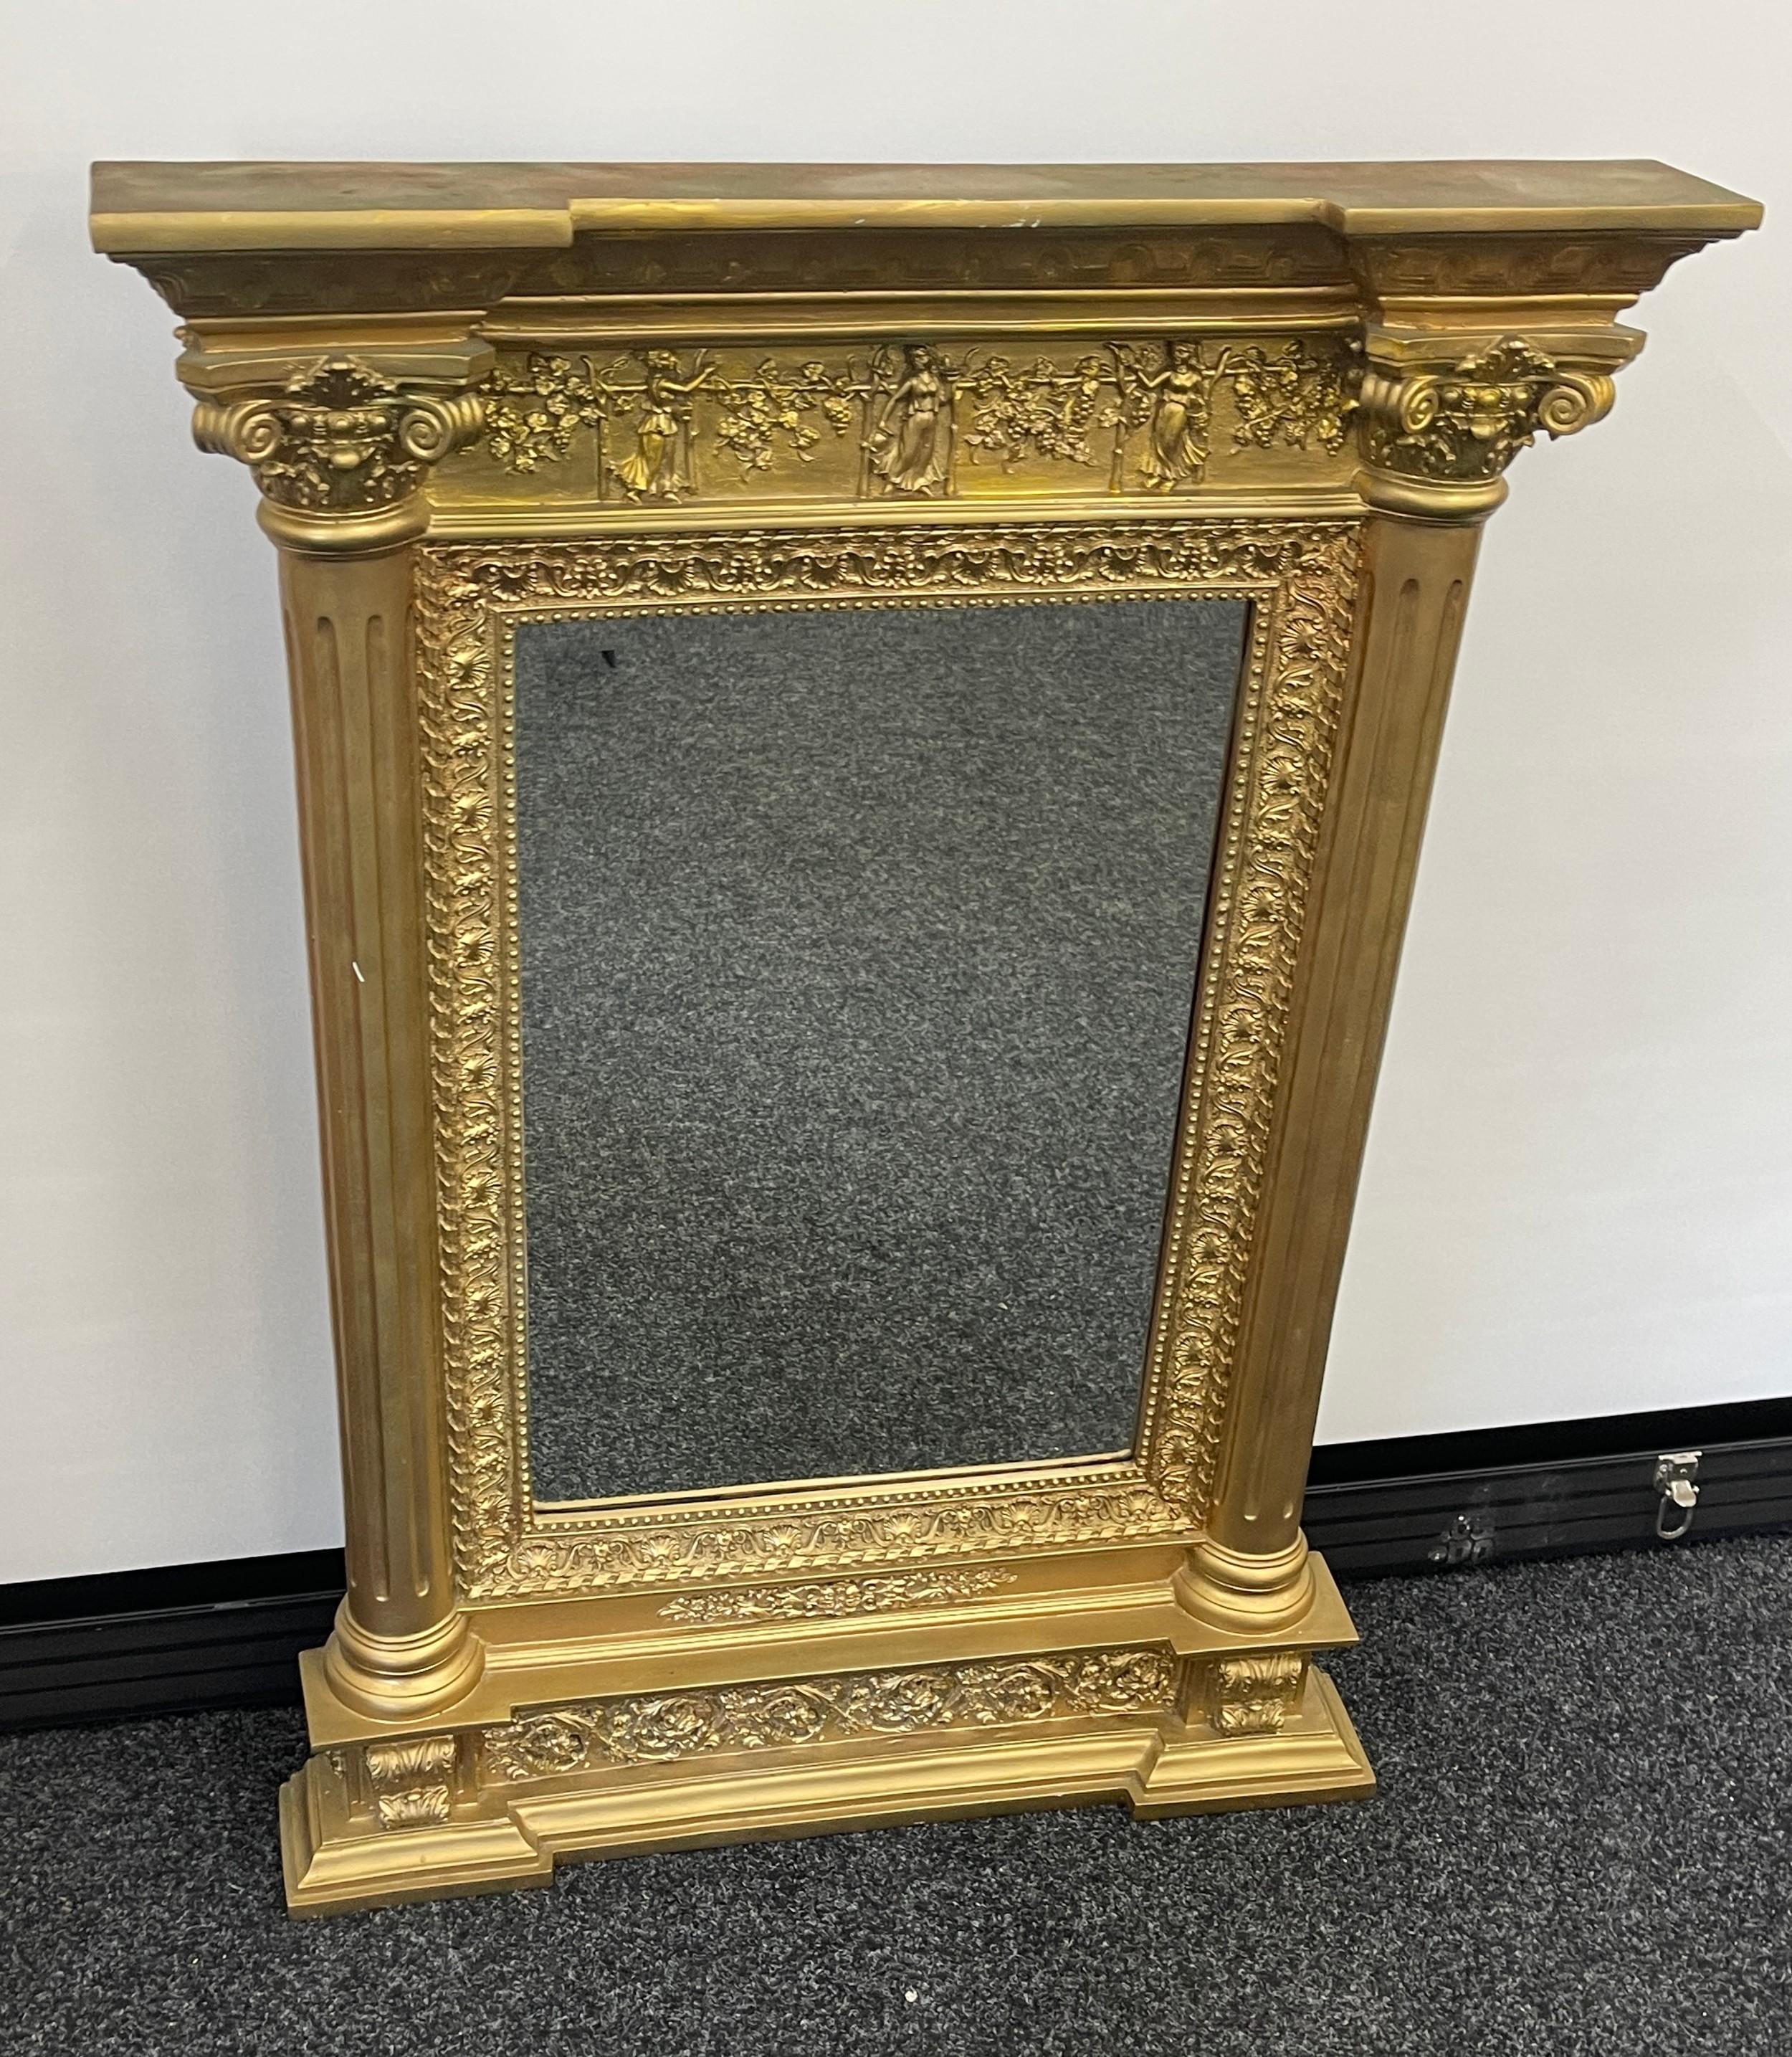 Gilt framed ornate mantle mirror, Height 40 inches, Width 30 inches